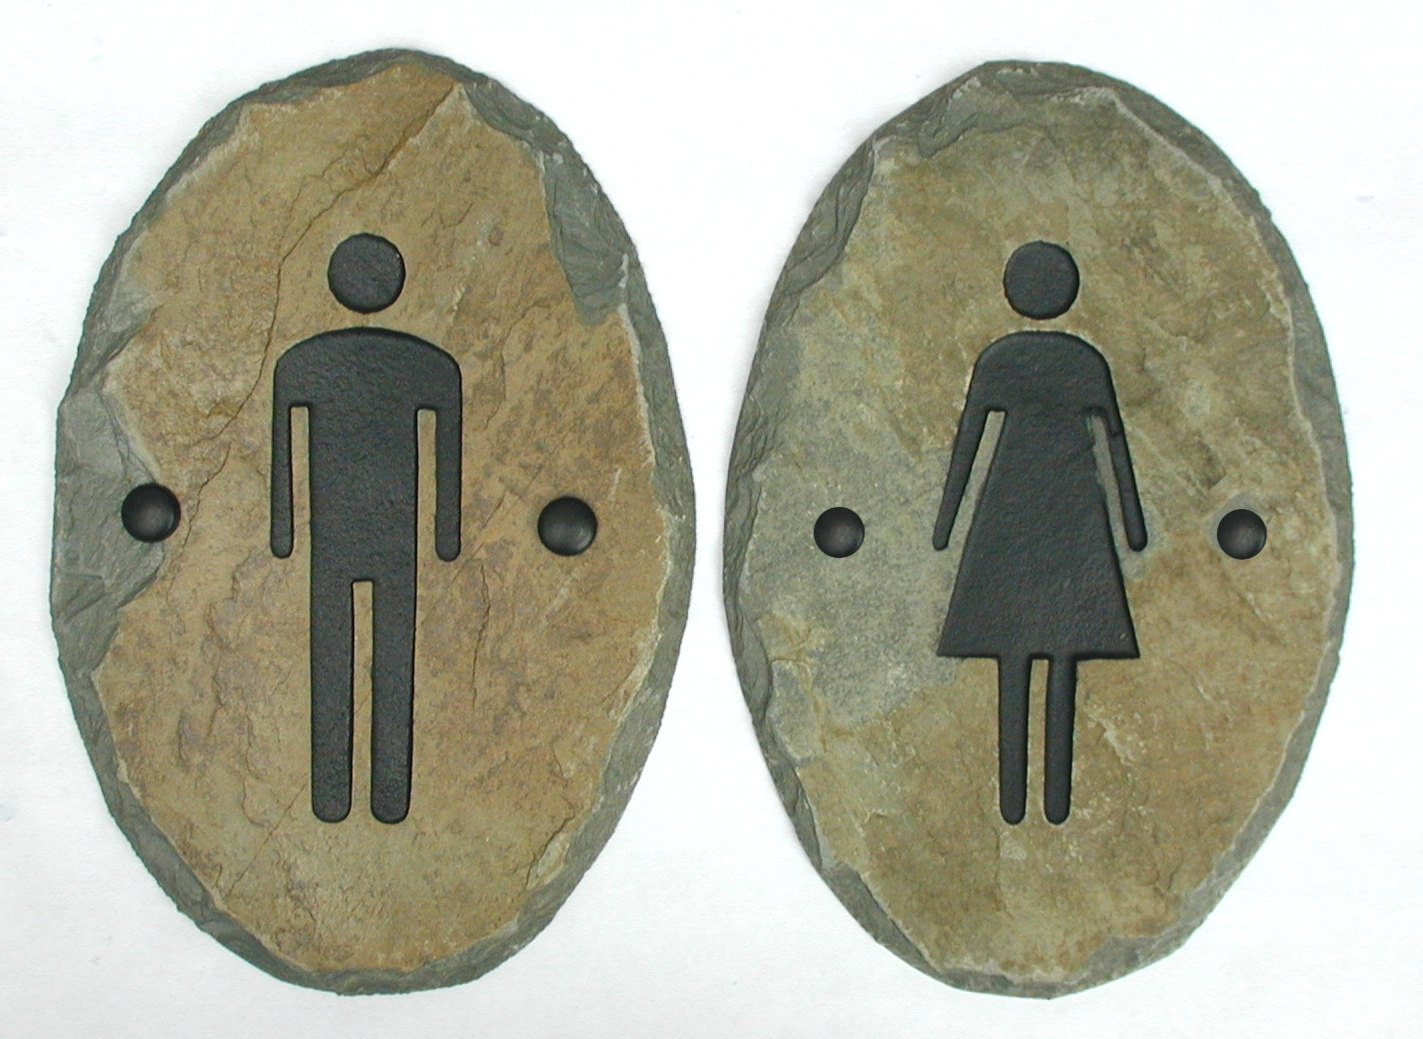 Popular items for restroom sign on Etsy